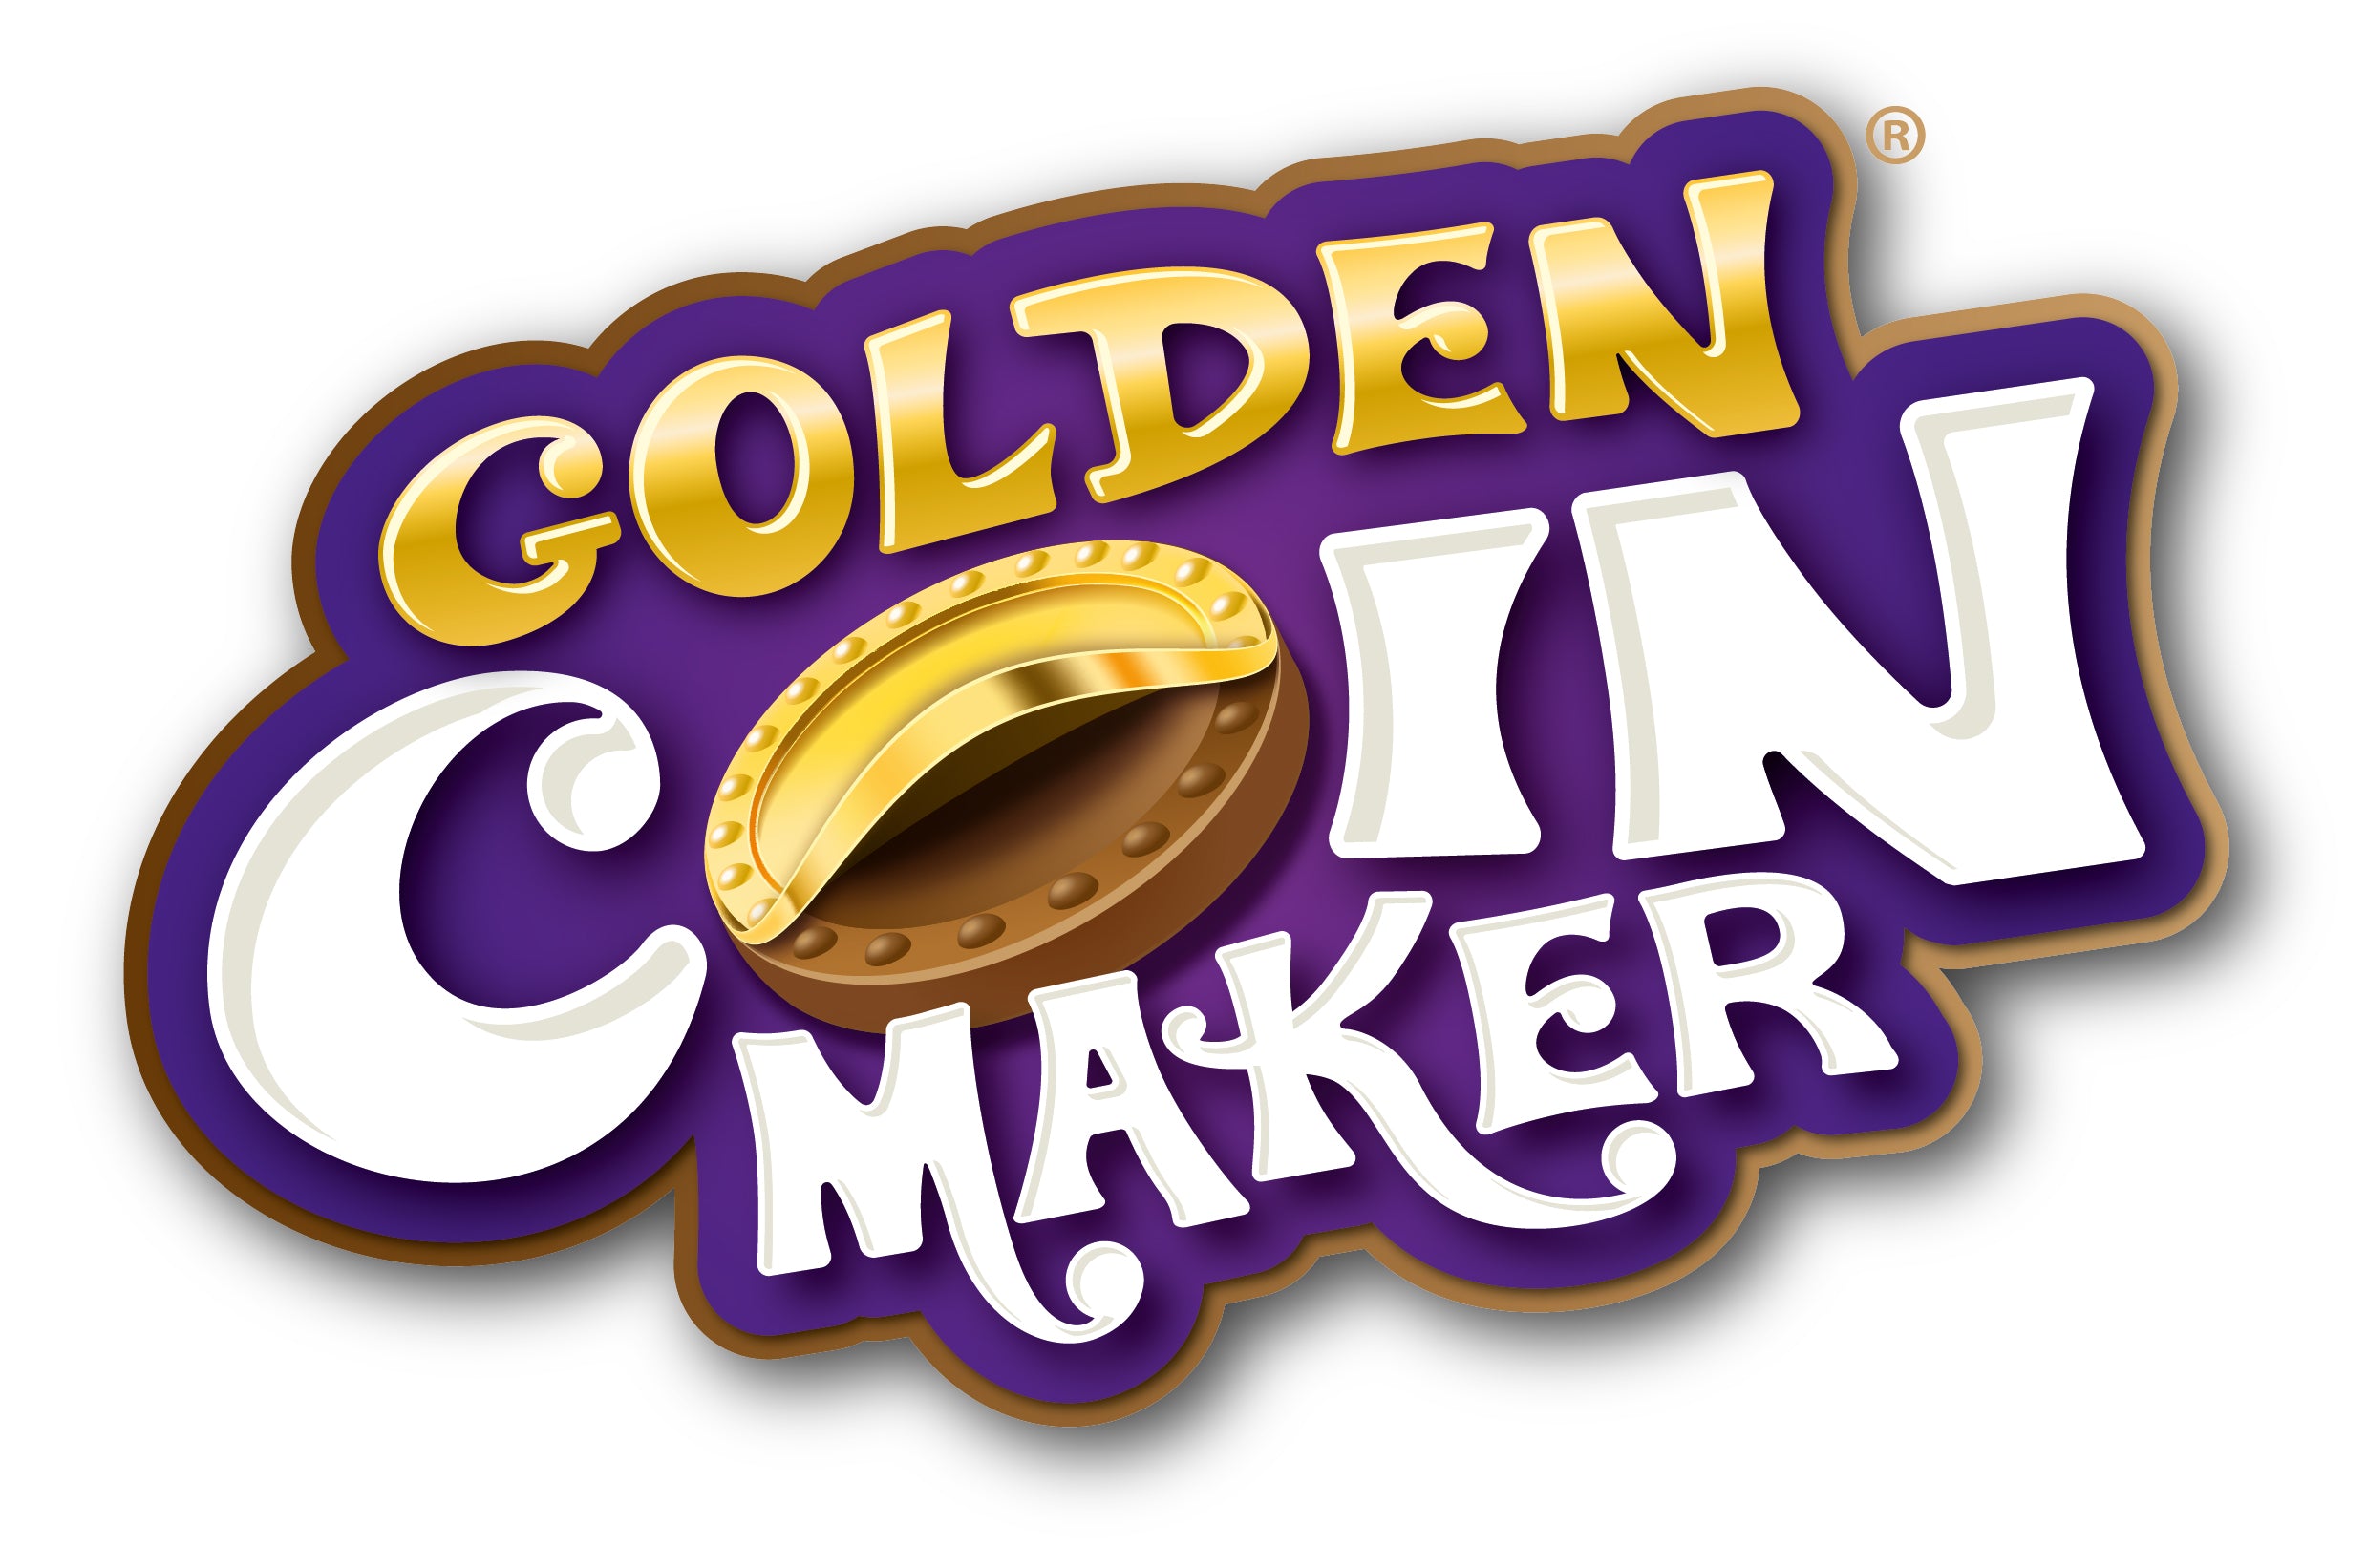 Golden Coin Maker - chocolate not included